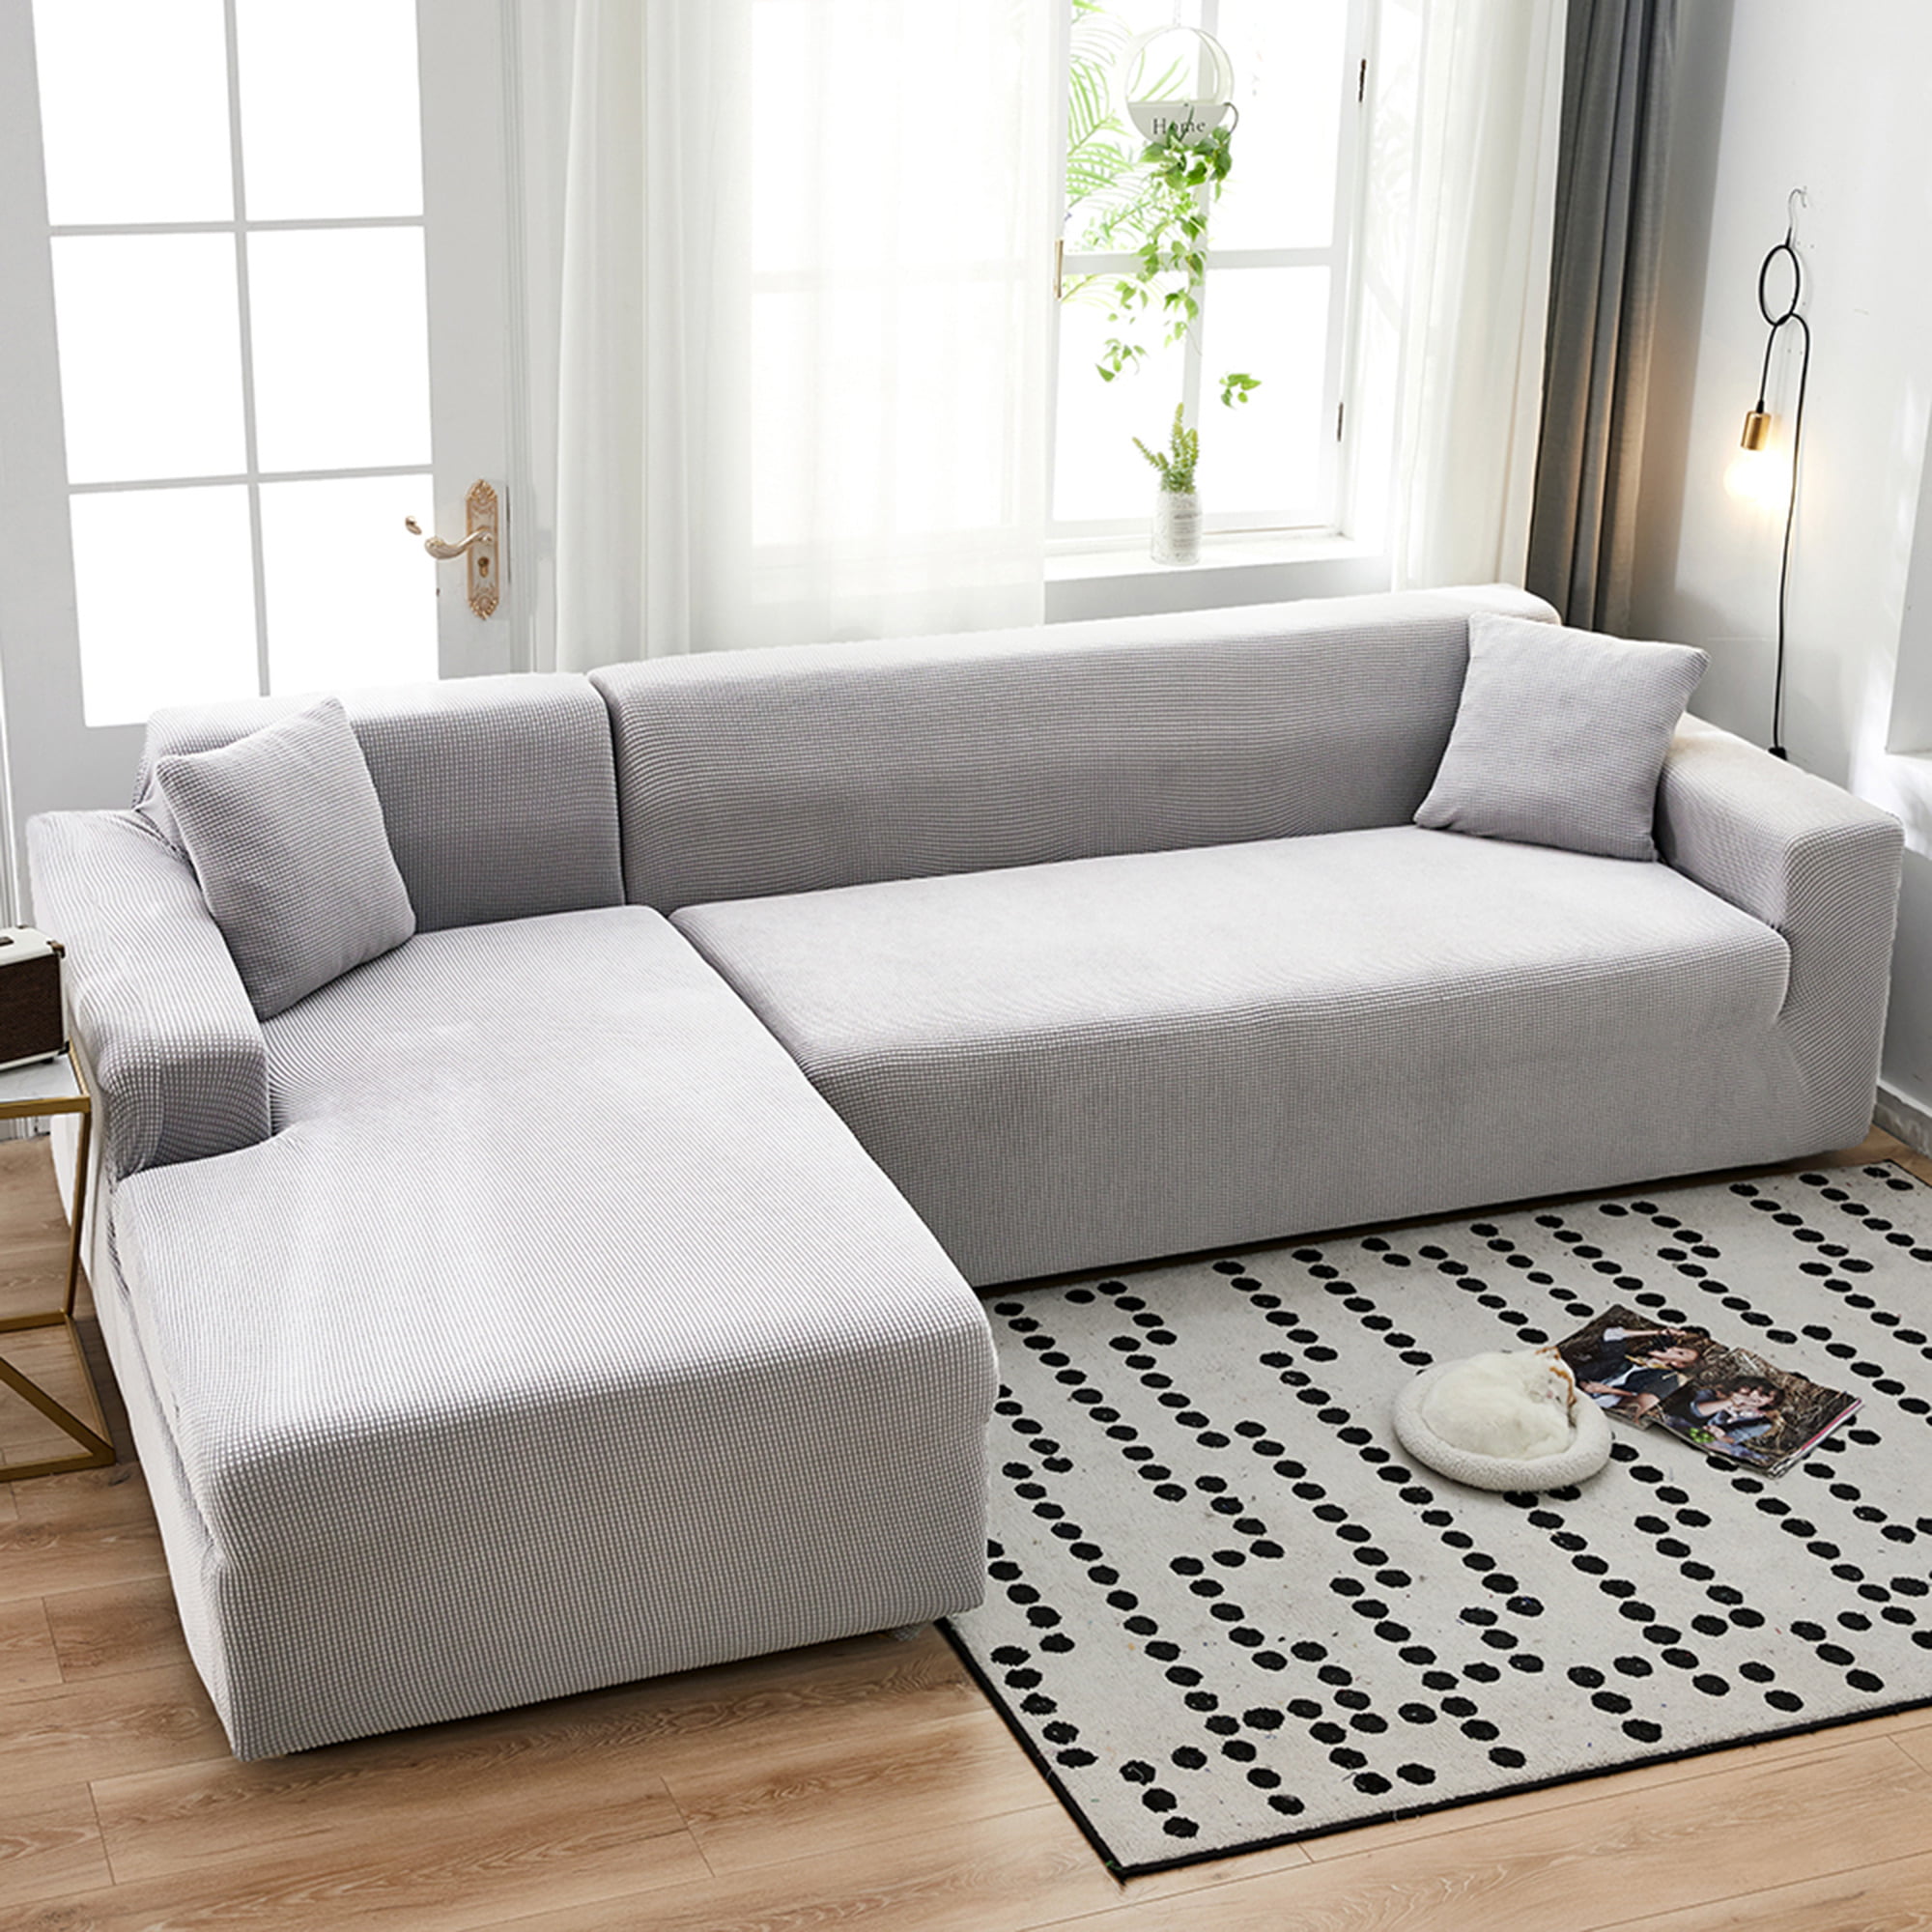 Stylish Sofa Covers For Cushion Couch, Child Proof Sofa Covers